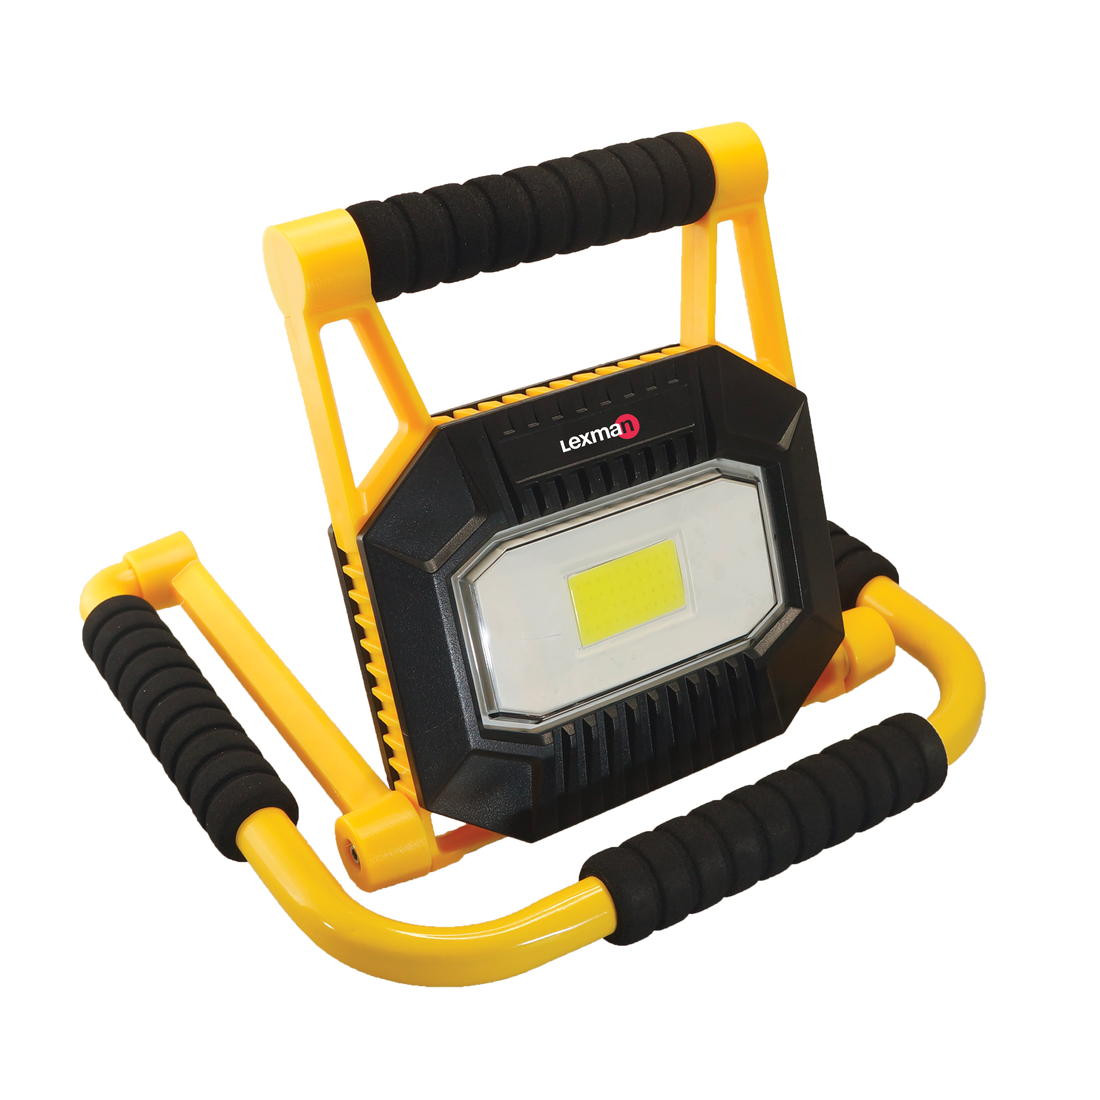 RECHARGEABLE WORKLIGHT 1200 LM - LEXMAN